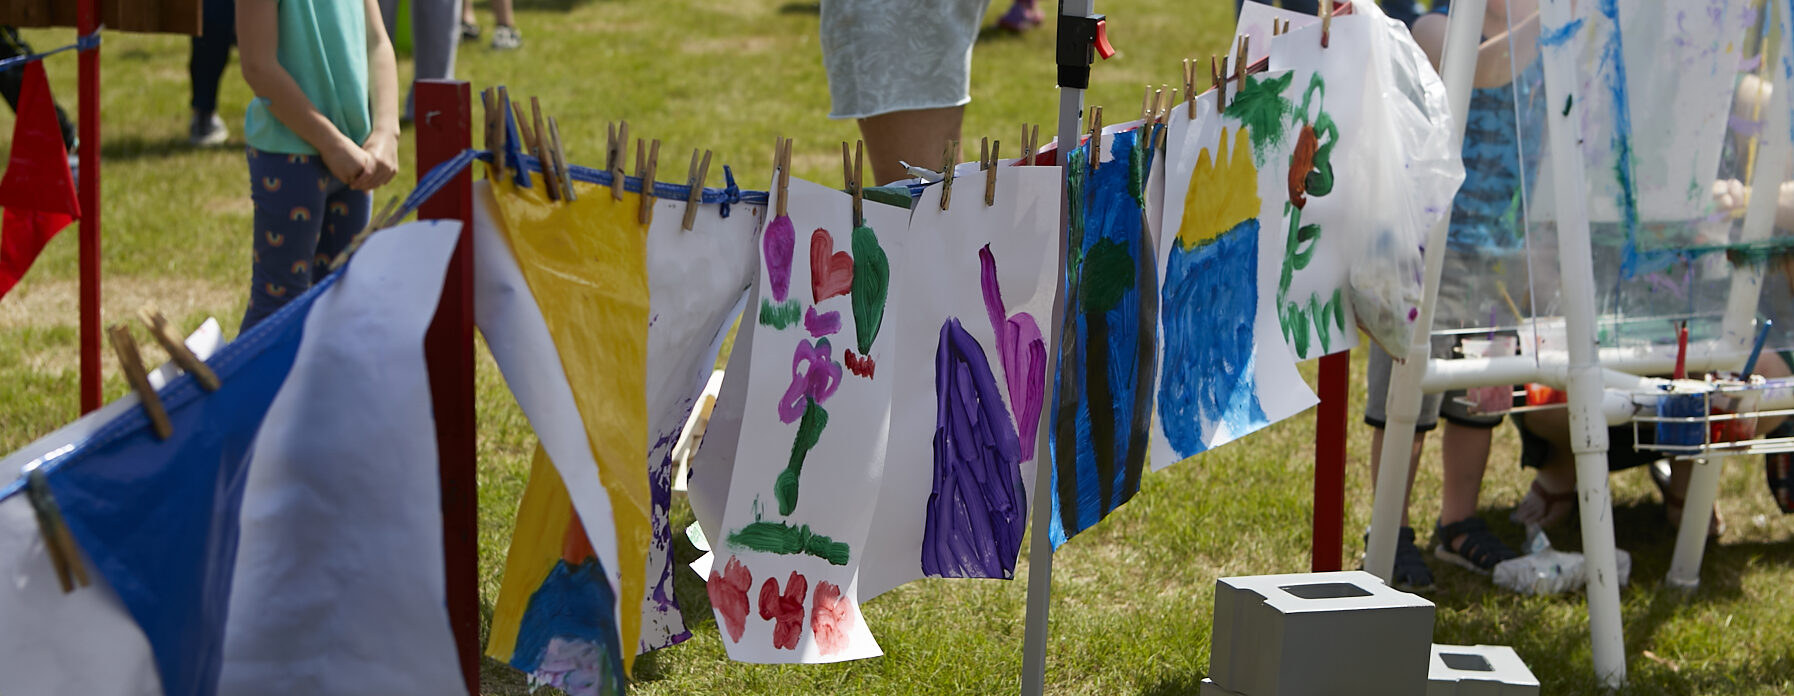 Photo of a "clothesline" of children's paintings hanging to dry